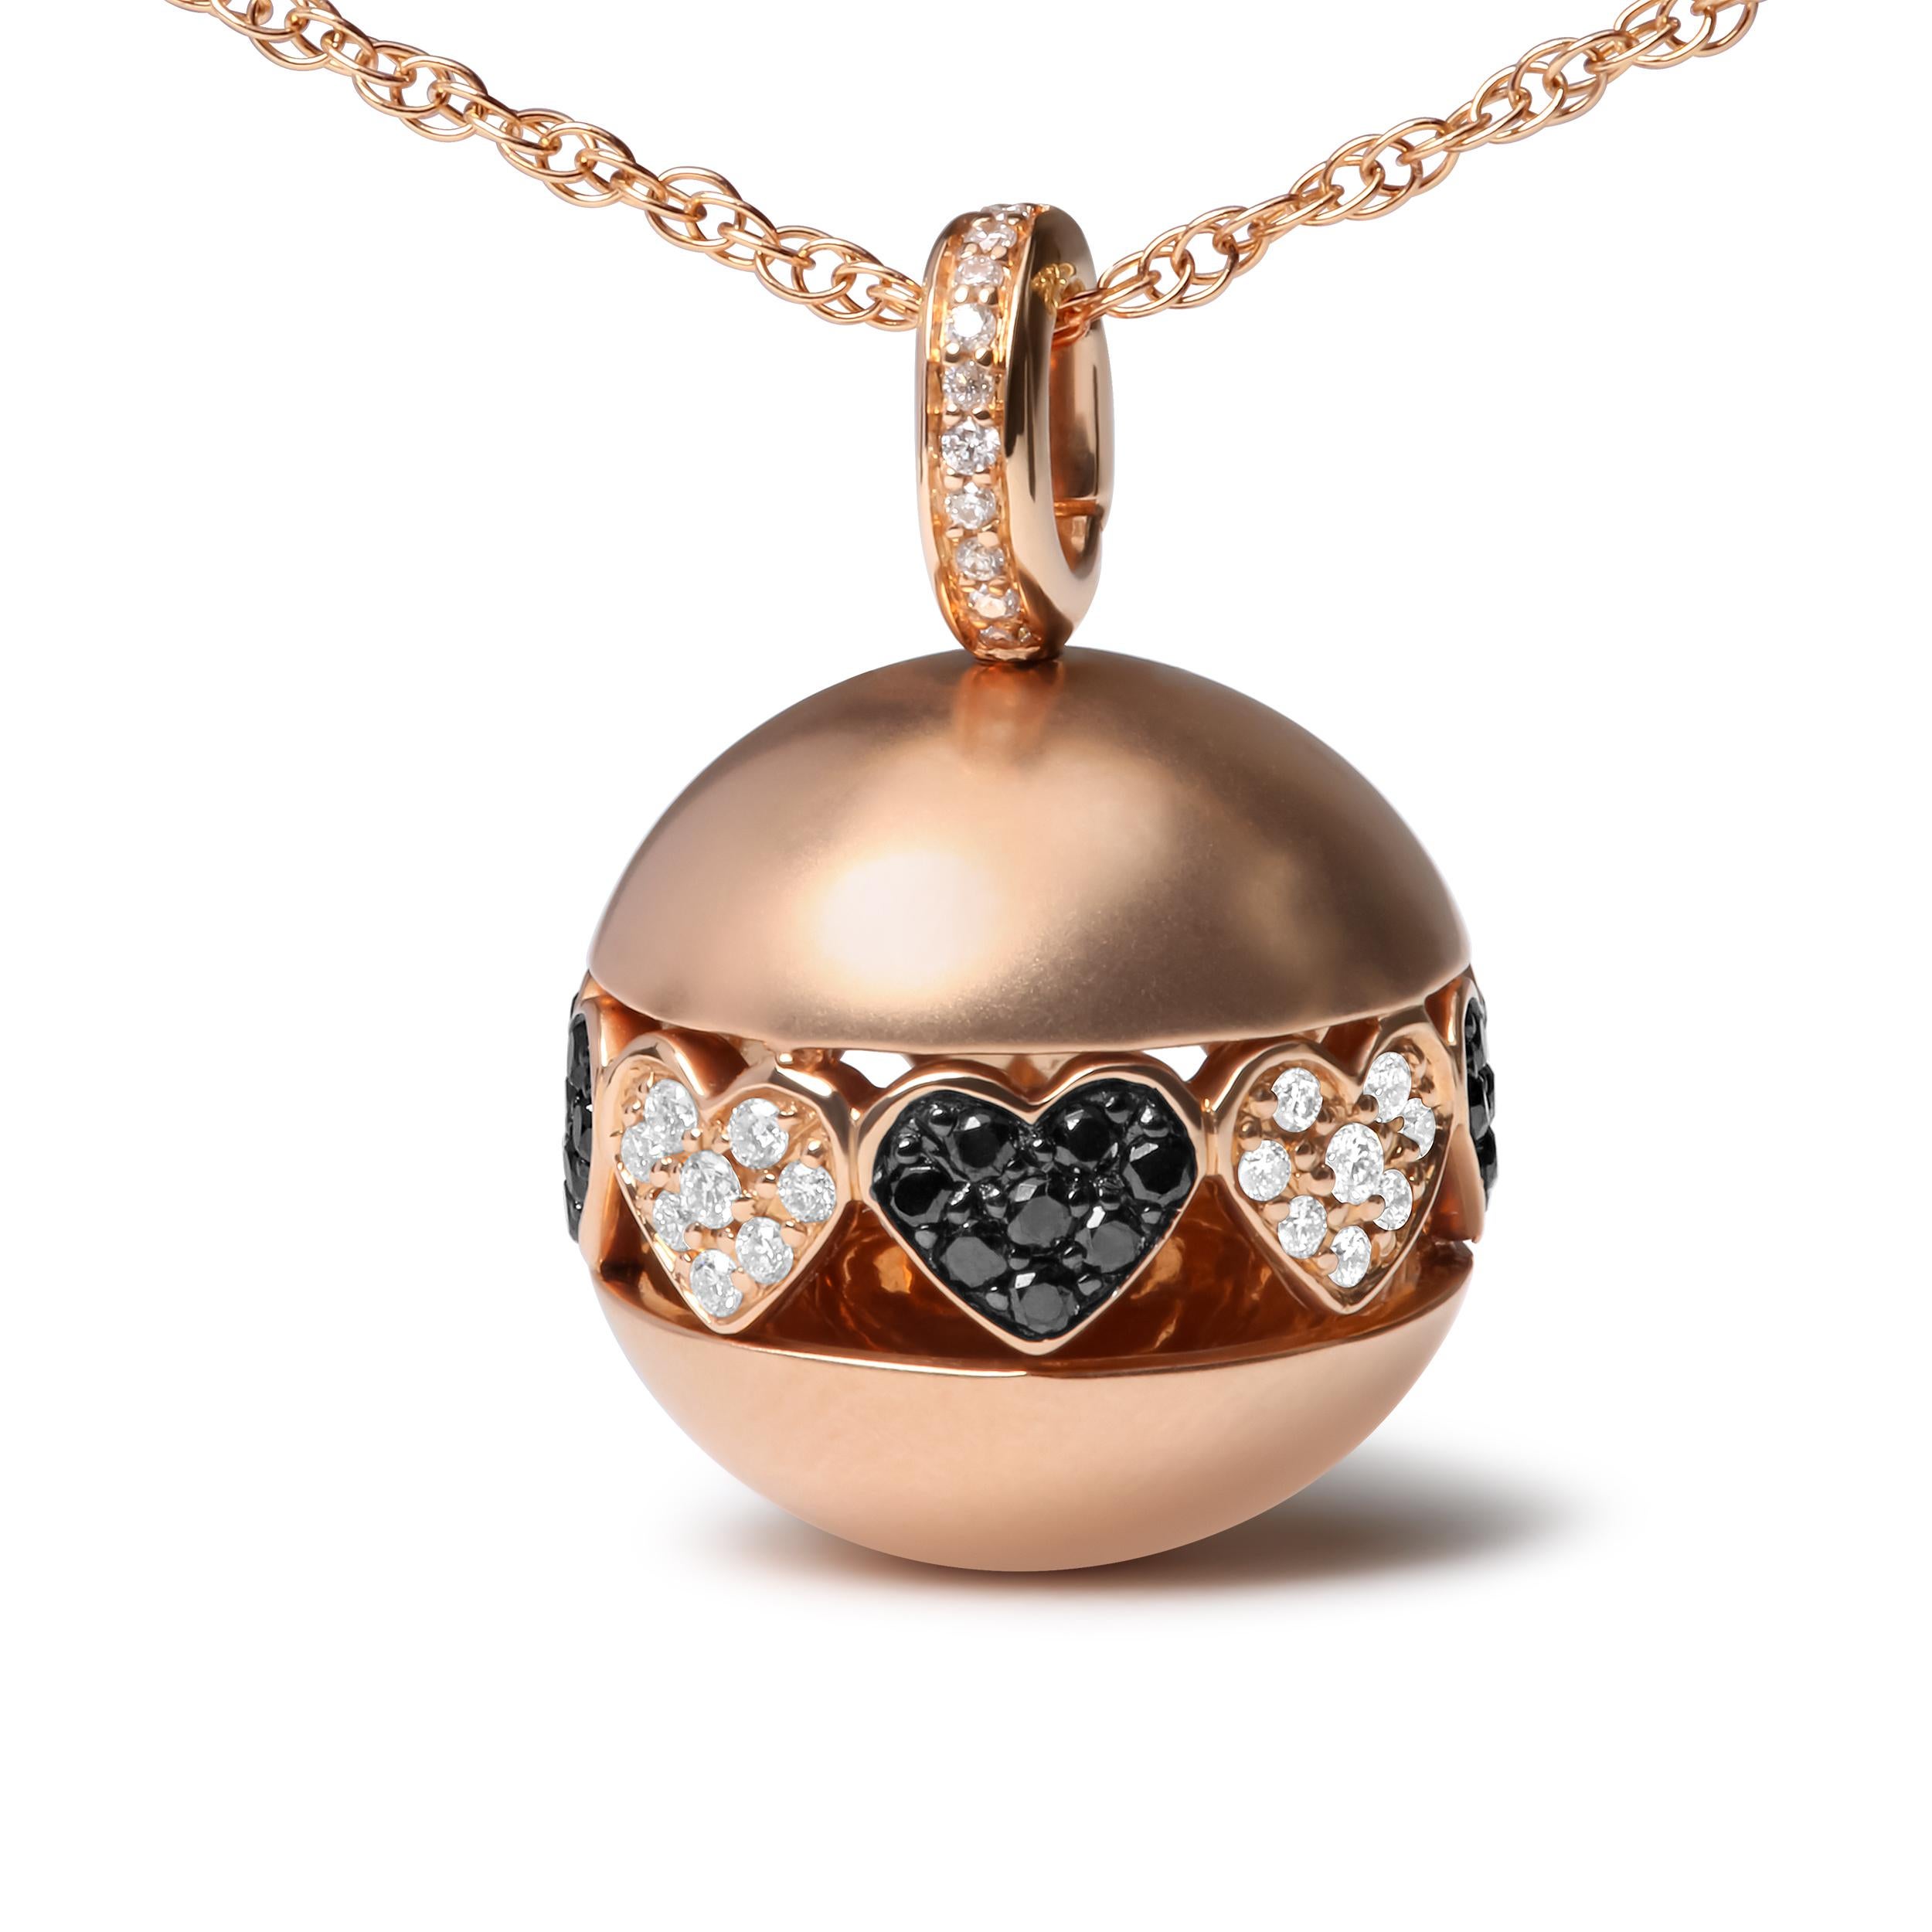 Cast in polished 18k rose gold, this ball drop pendant necklace showcases a design that is rich in symbolism. A single row of diamond-encrusted filigree heart silhouettes spread out around the perimeter of the ball, declaring a statement of love.